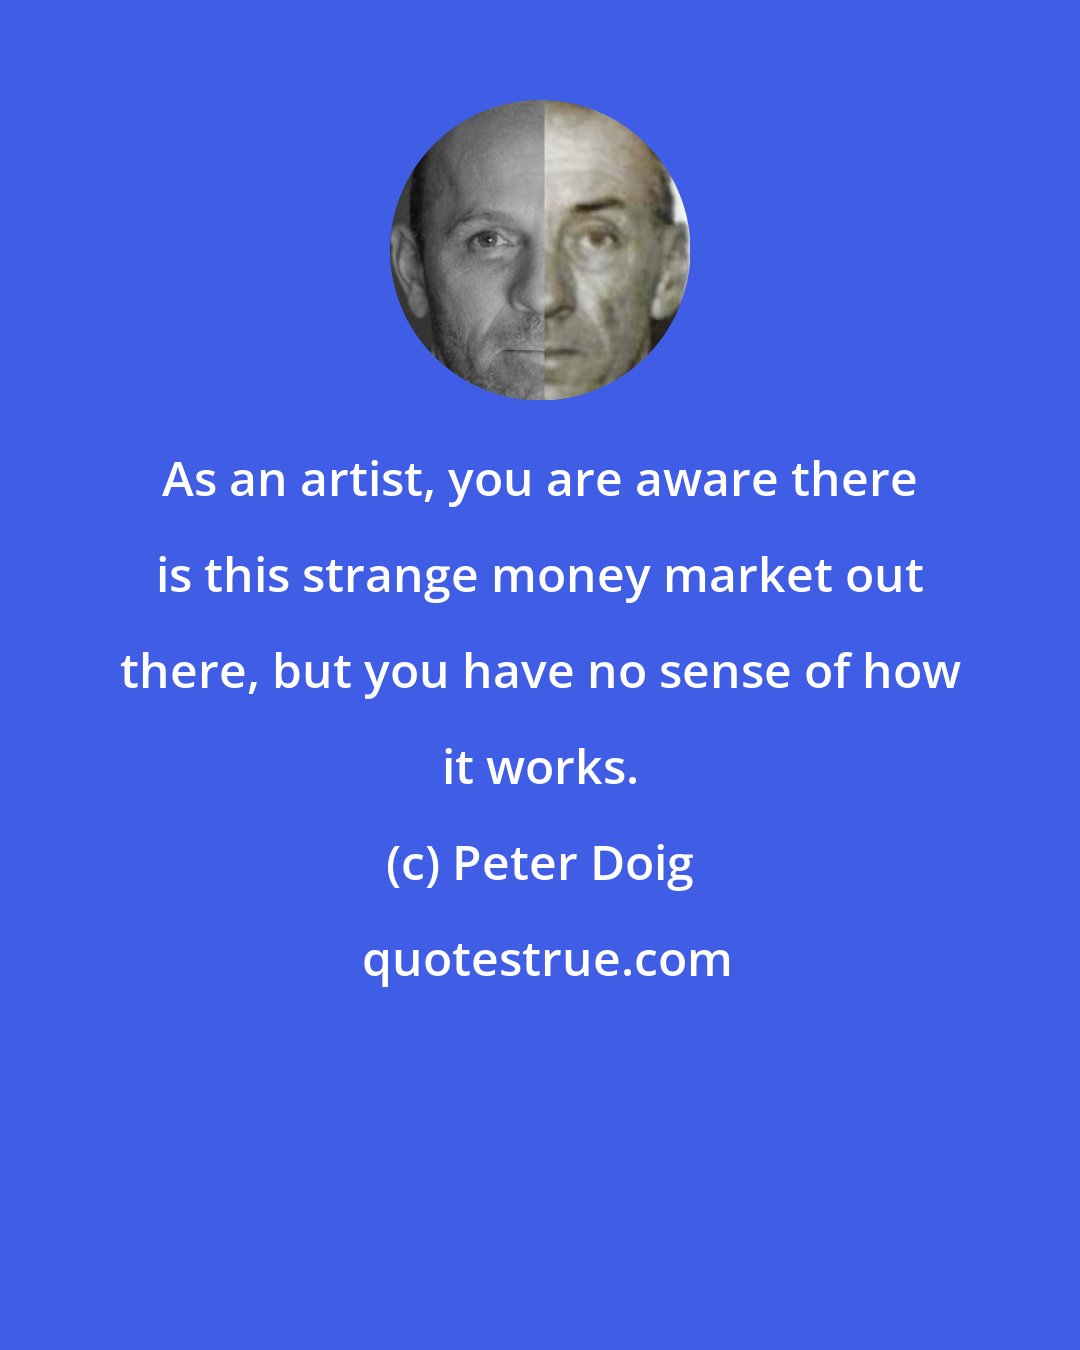 Peter Doig: As an artist, you are aware there is this strange money market out there, but you have no sense of how it works.